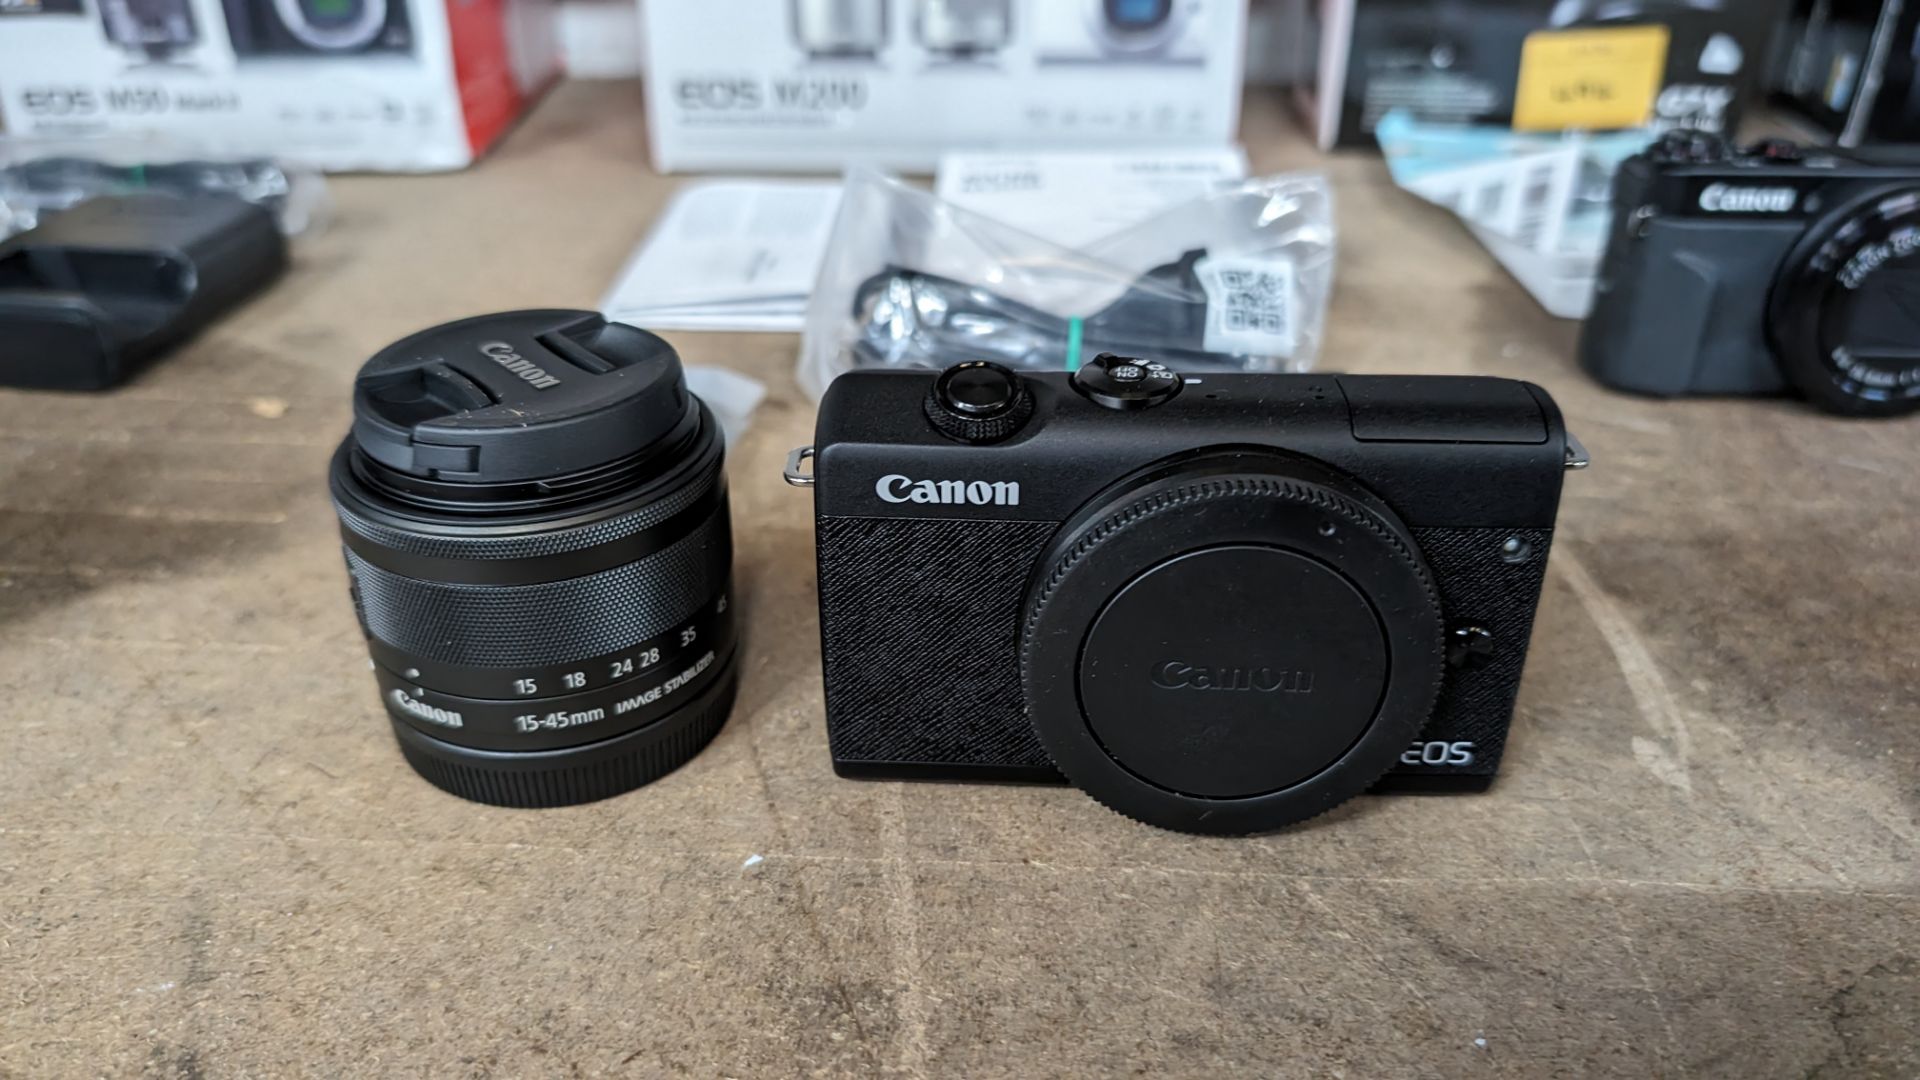 Canon EOS M200 camera kit, including 15-45mm image stabilizer lens, plus battery and charger - Image 3 of 12